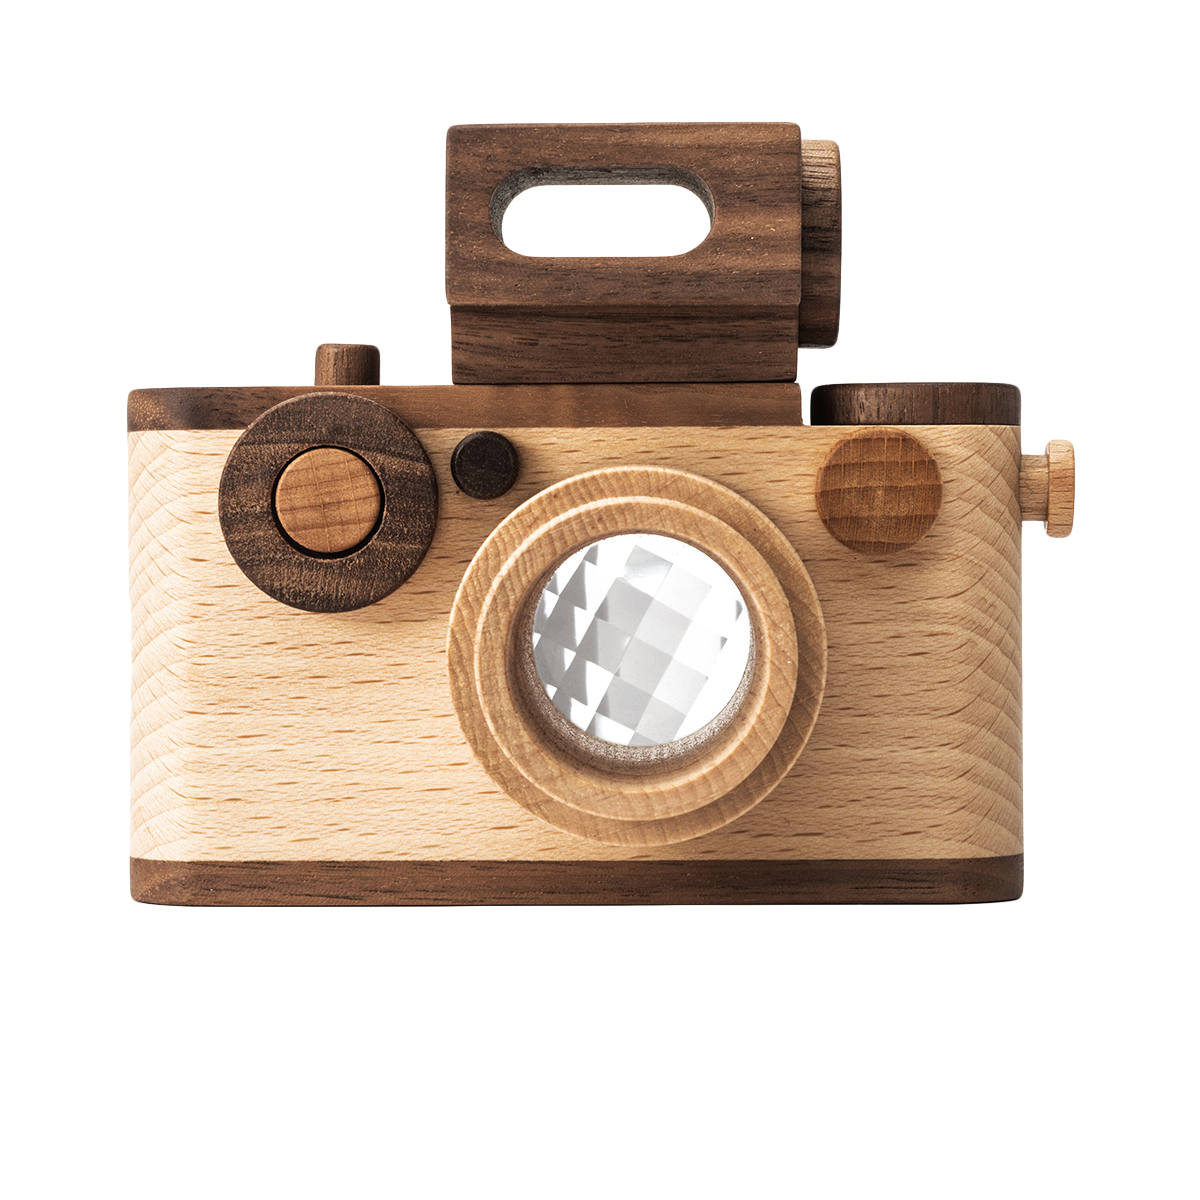 Father's Factory 35MM vintage wooden toy camera